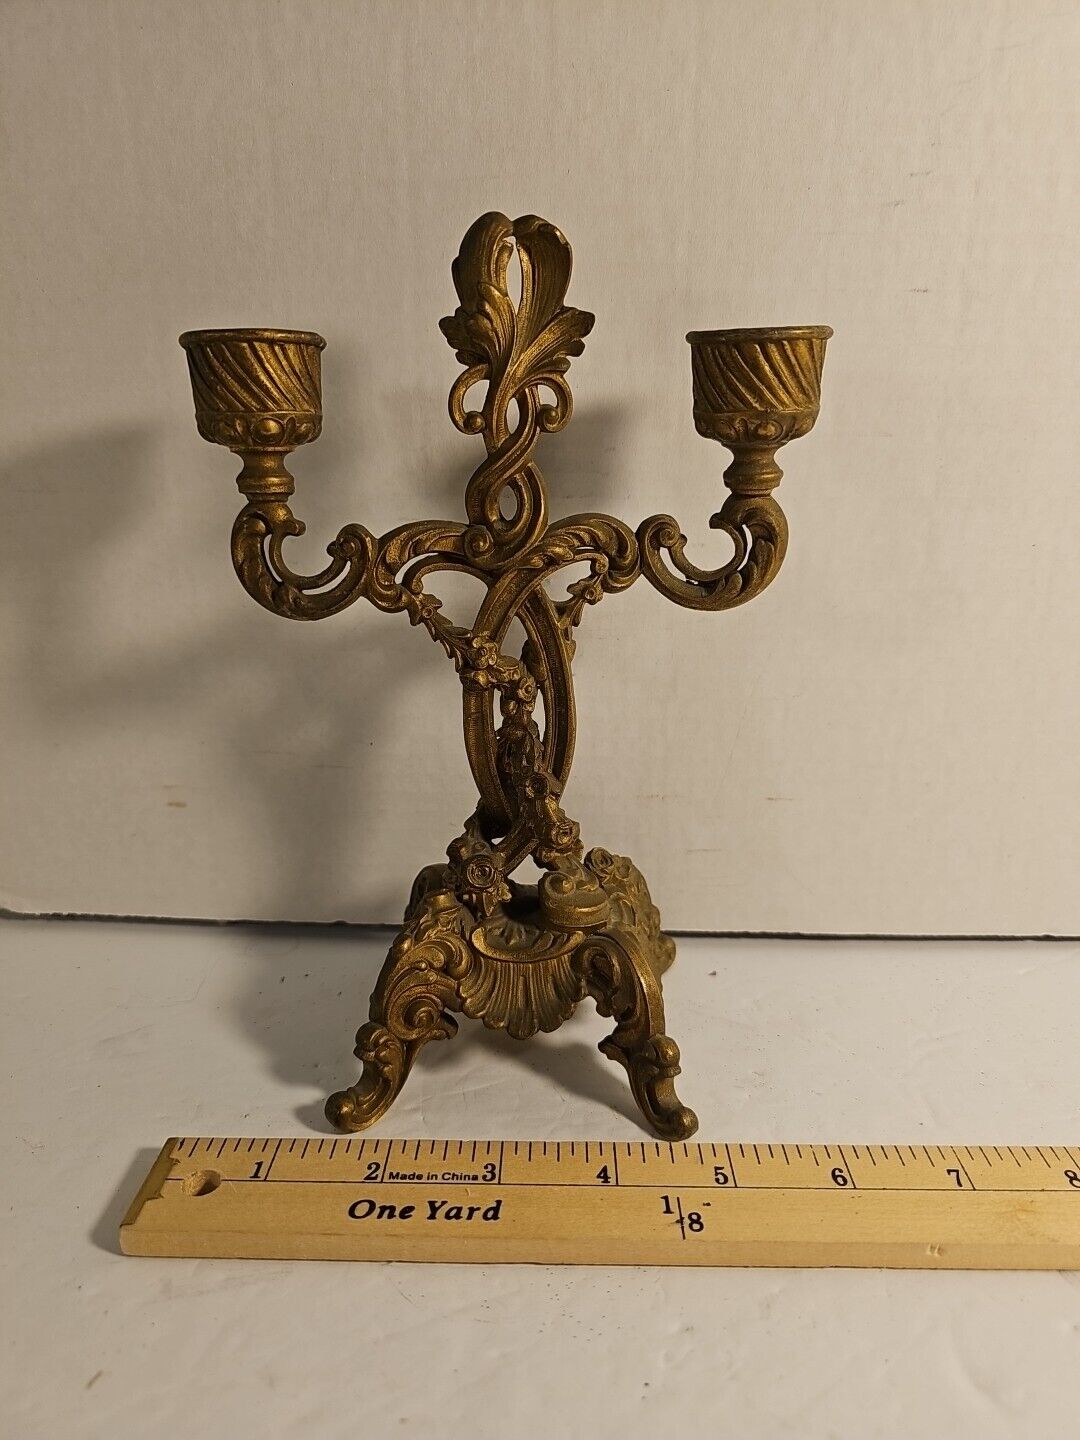 Antique Art Nouveau Double Arm Footed Gilded Candle Holder